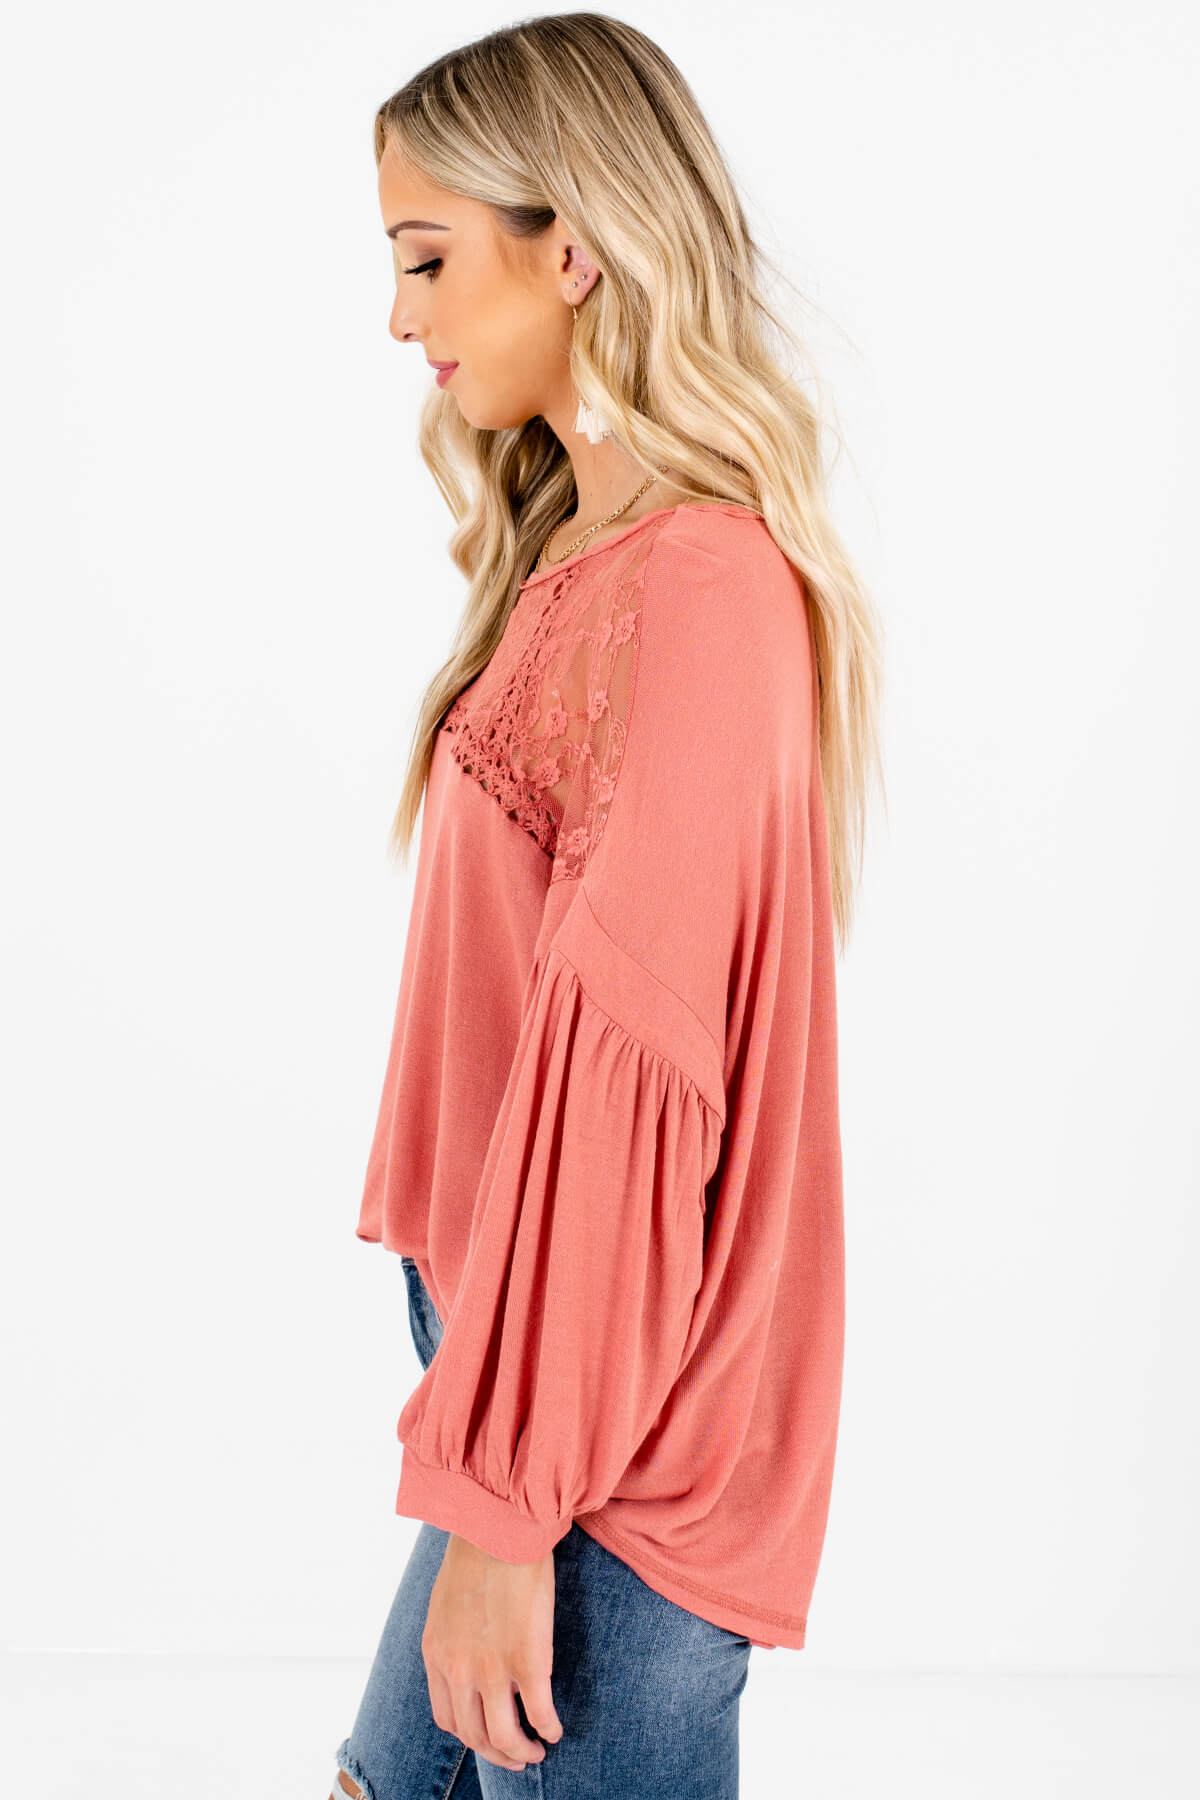 Women's Pink Oversized Fit Boutique Tops